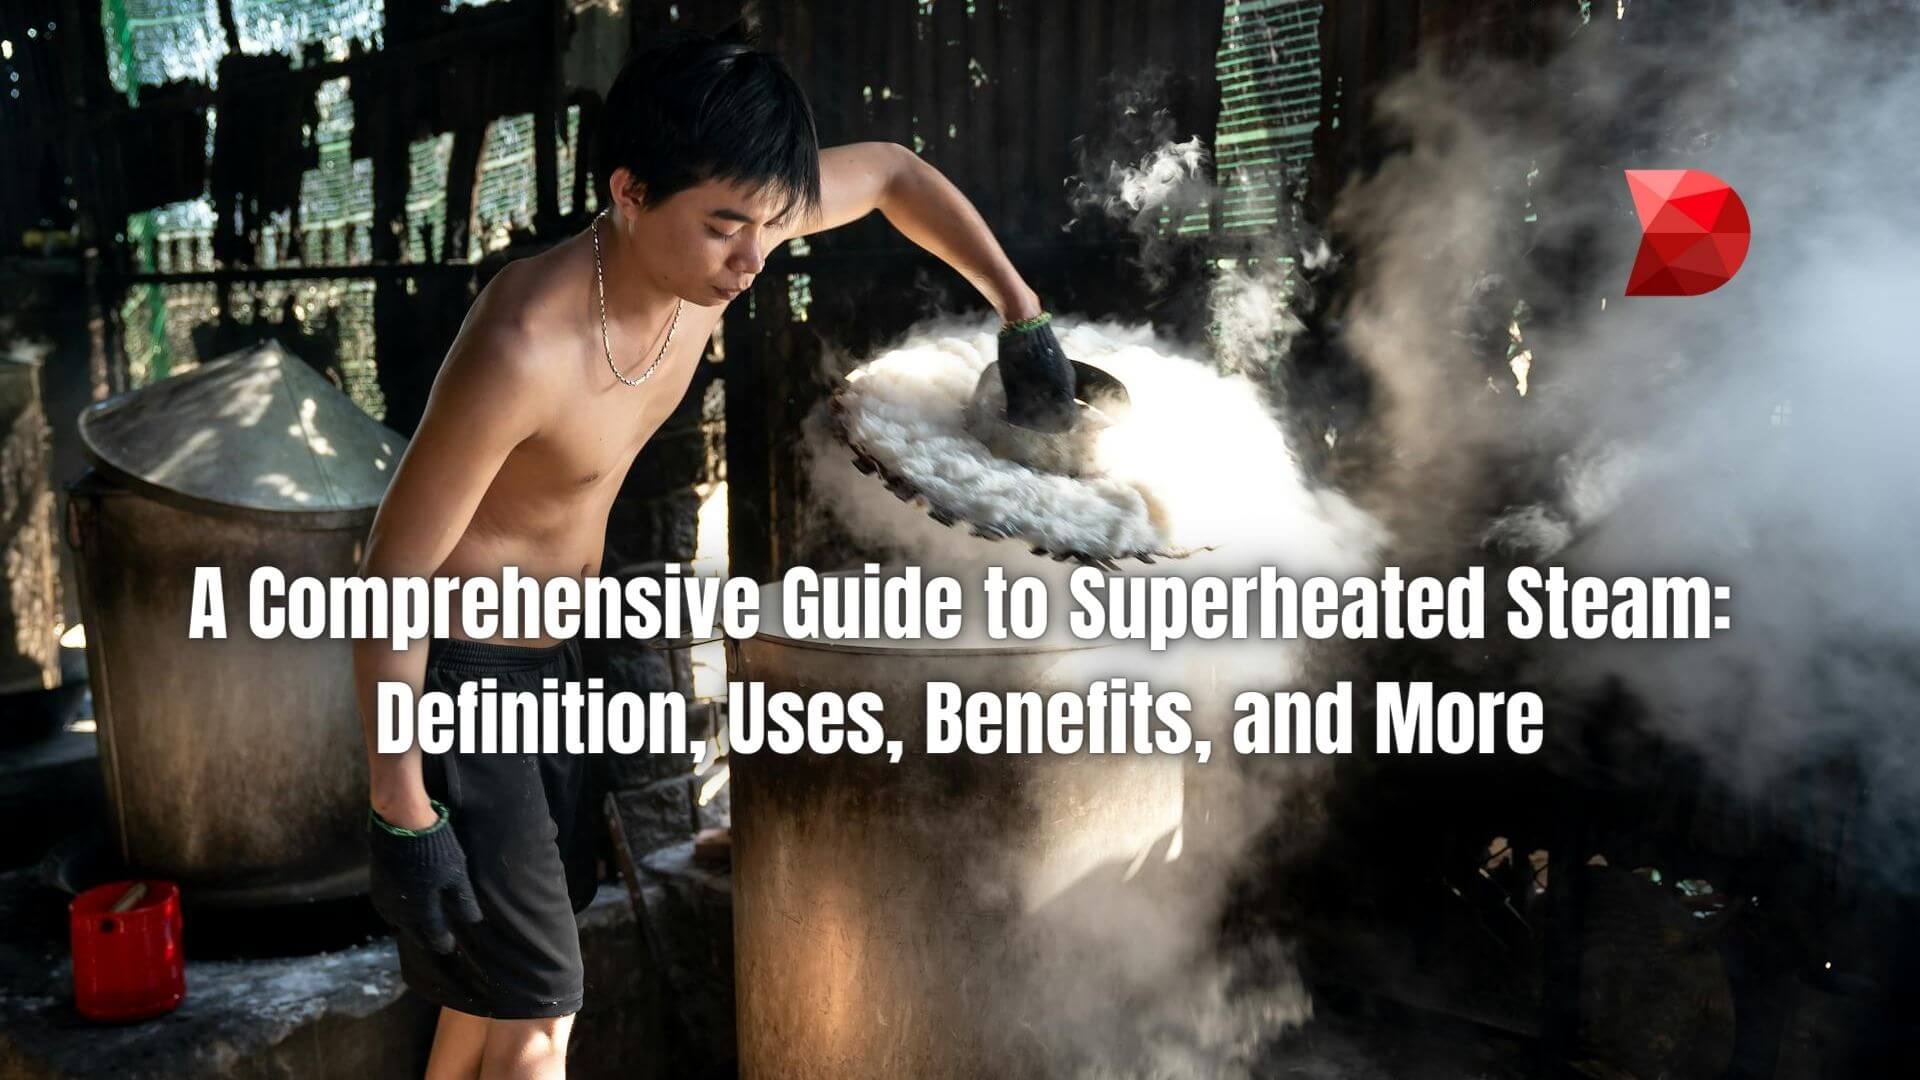 Unlock the potential of superheated steam with our guide. Discover its definition, diverse applications, benefits, and practical insights.